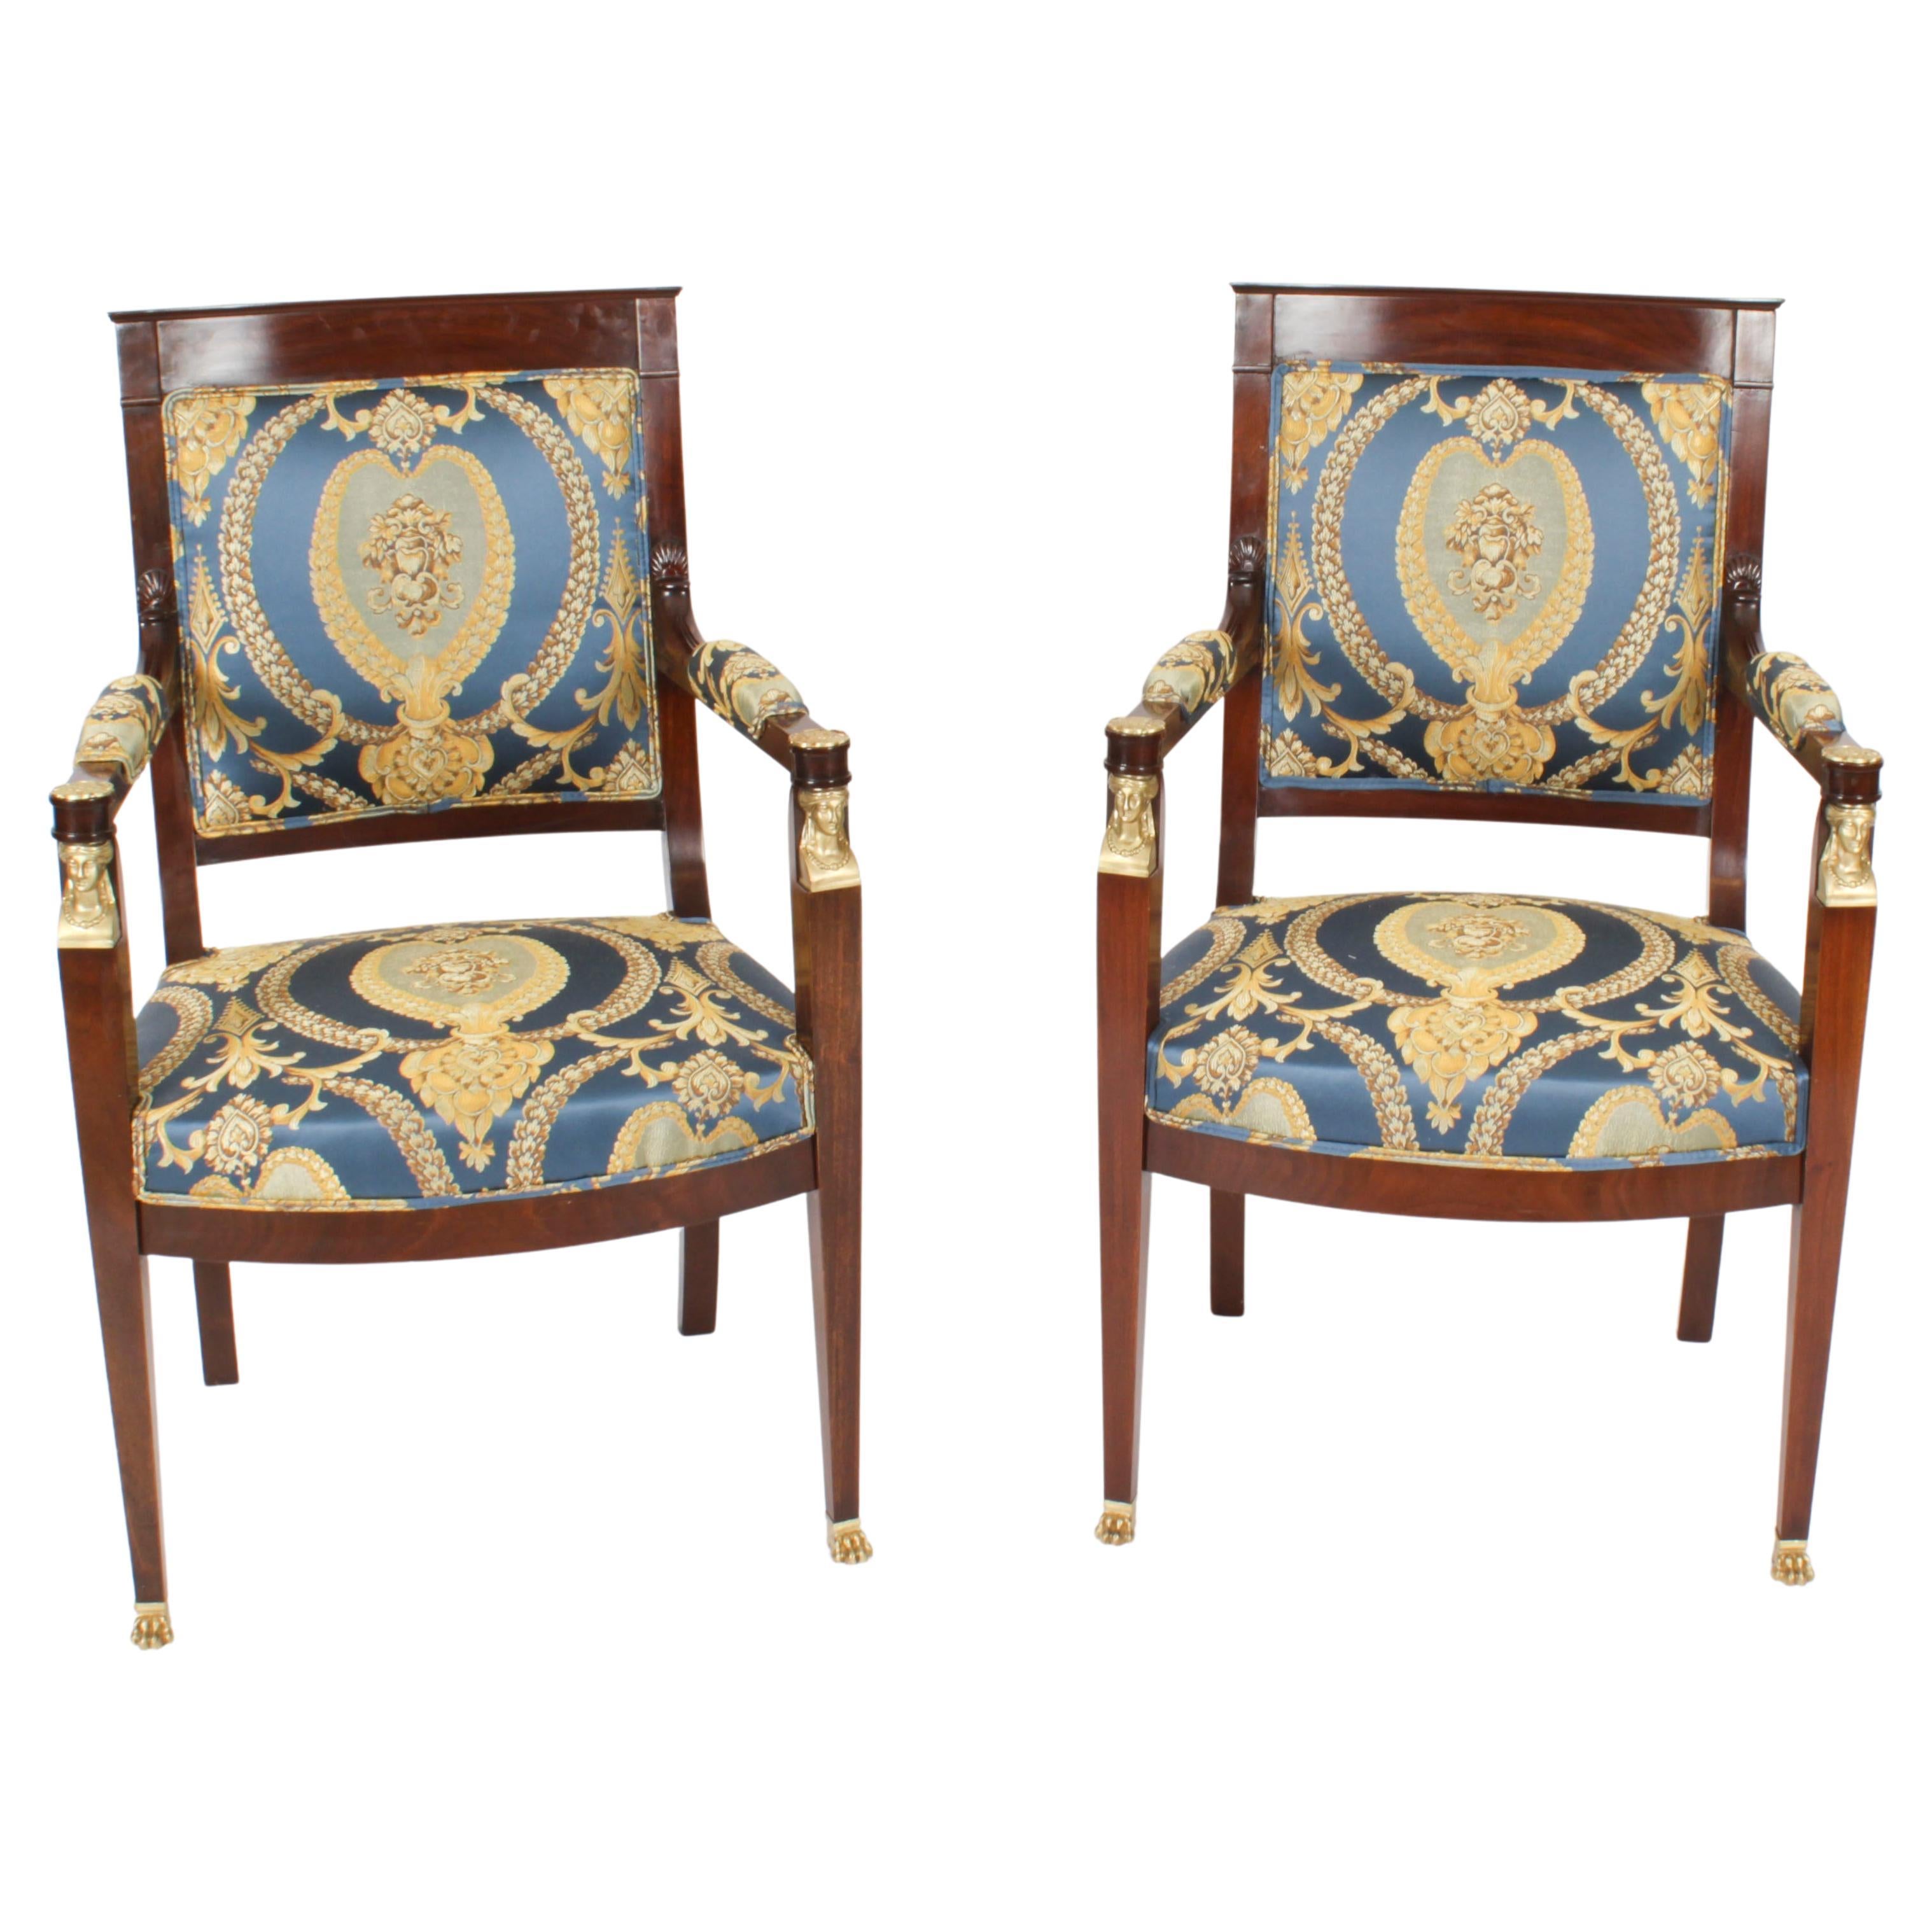 Antique Pair French Empire Revival Ormolu Mounted Armchairs 1870s 19th Century